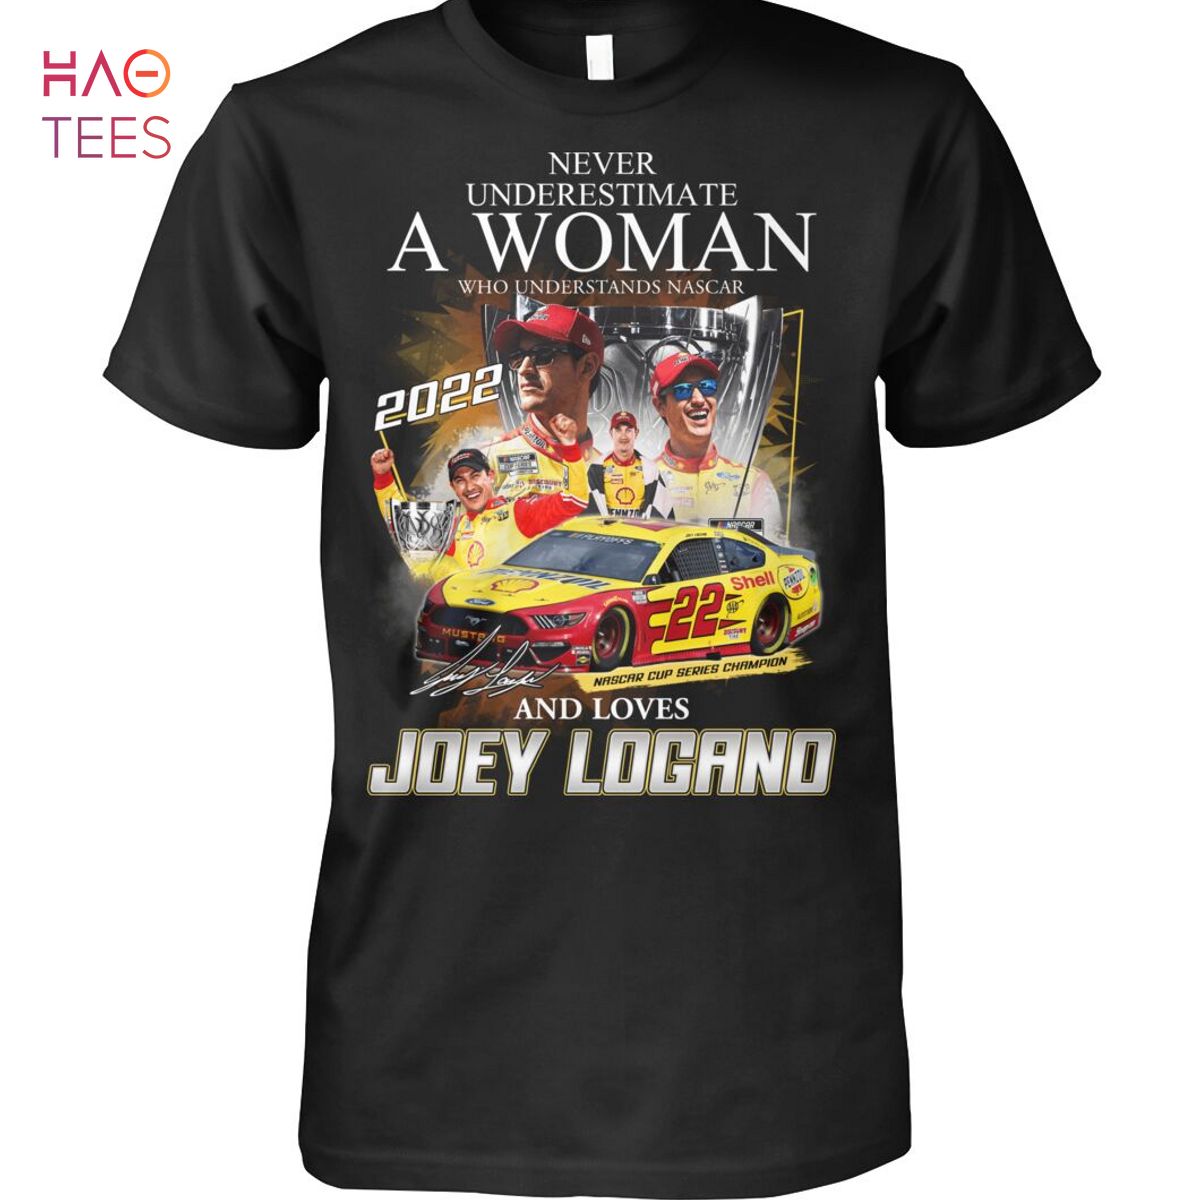 HOT 2022 Joey Logand Shirt Limited Edition